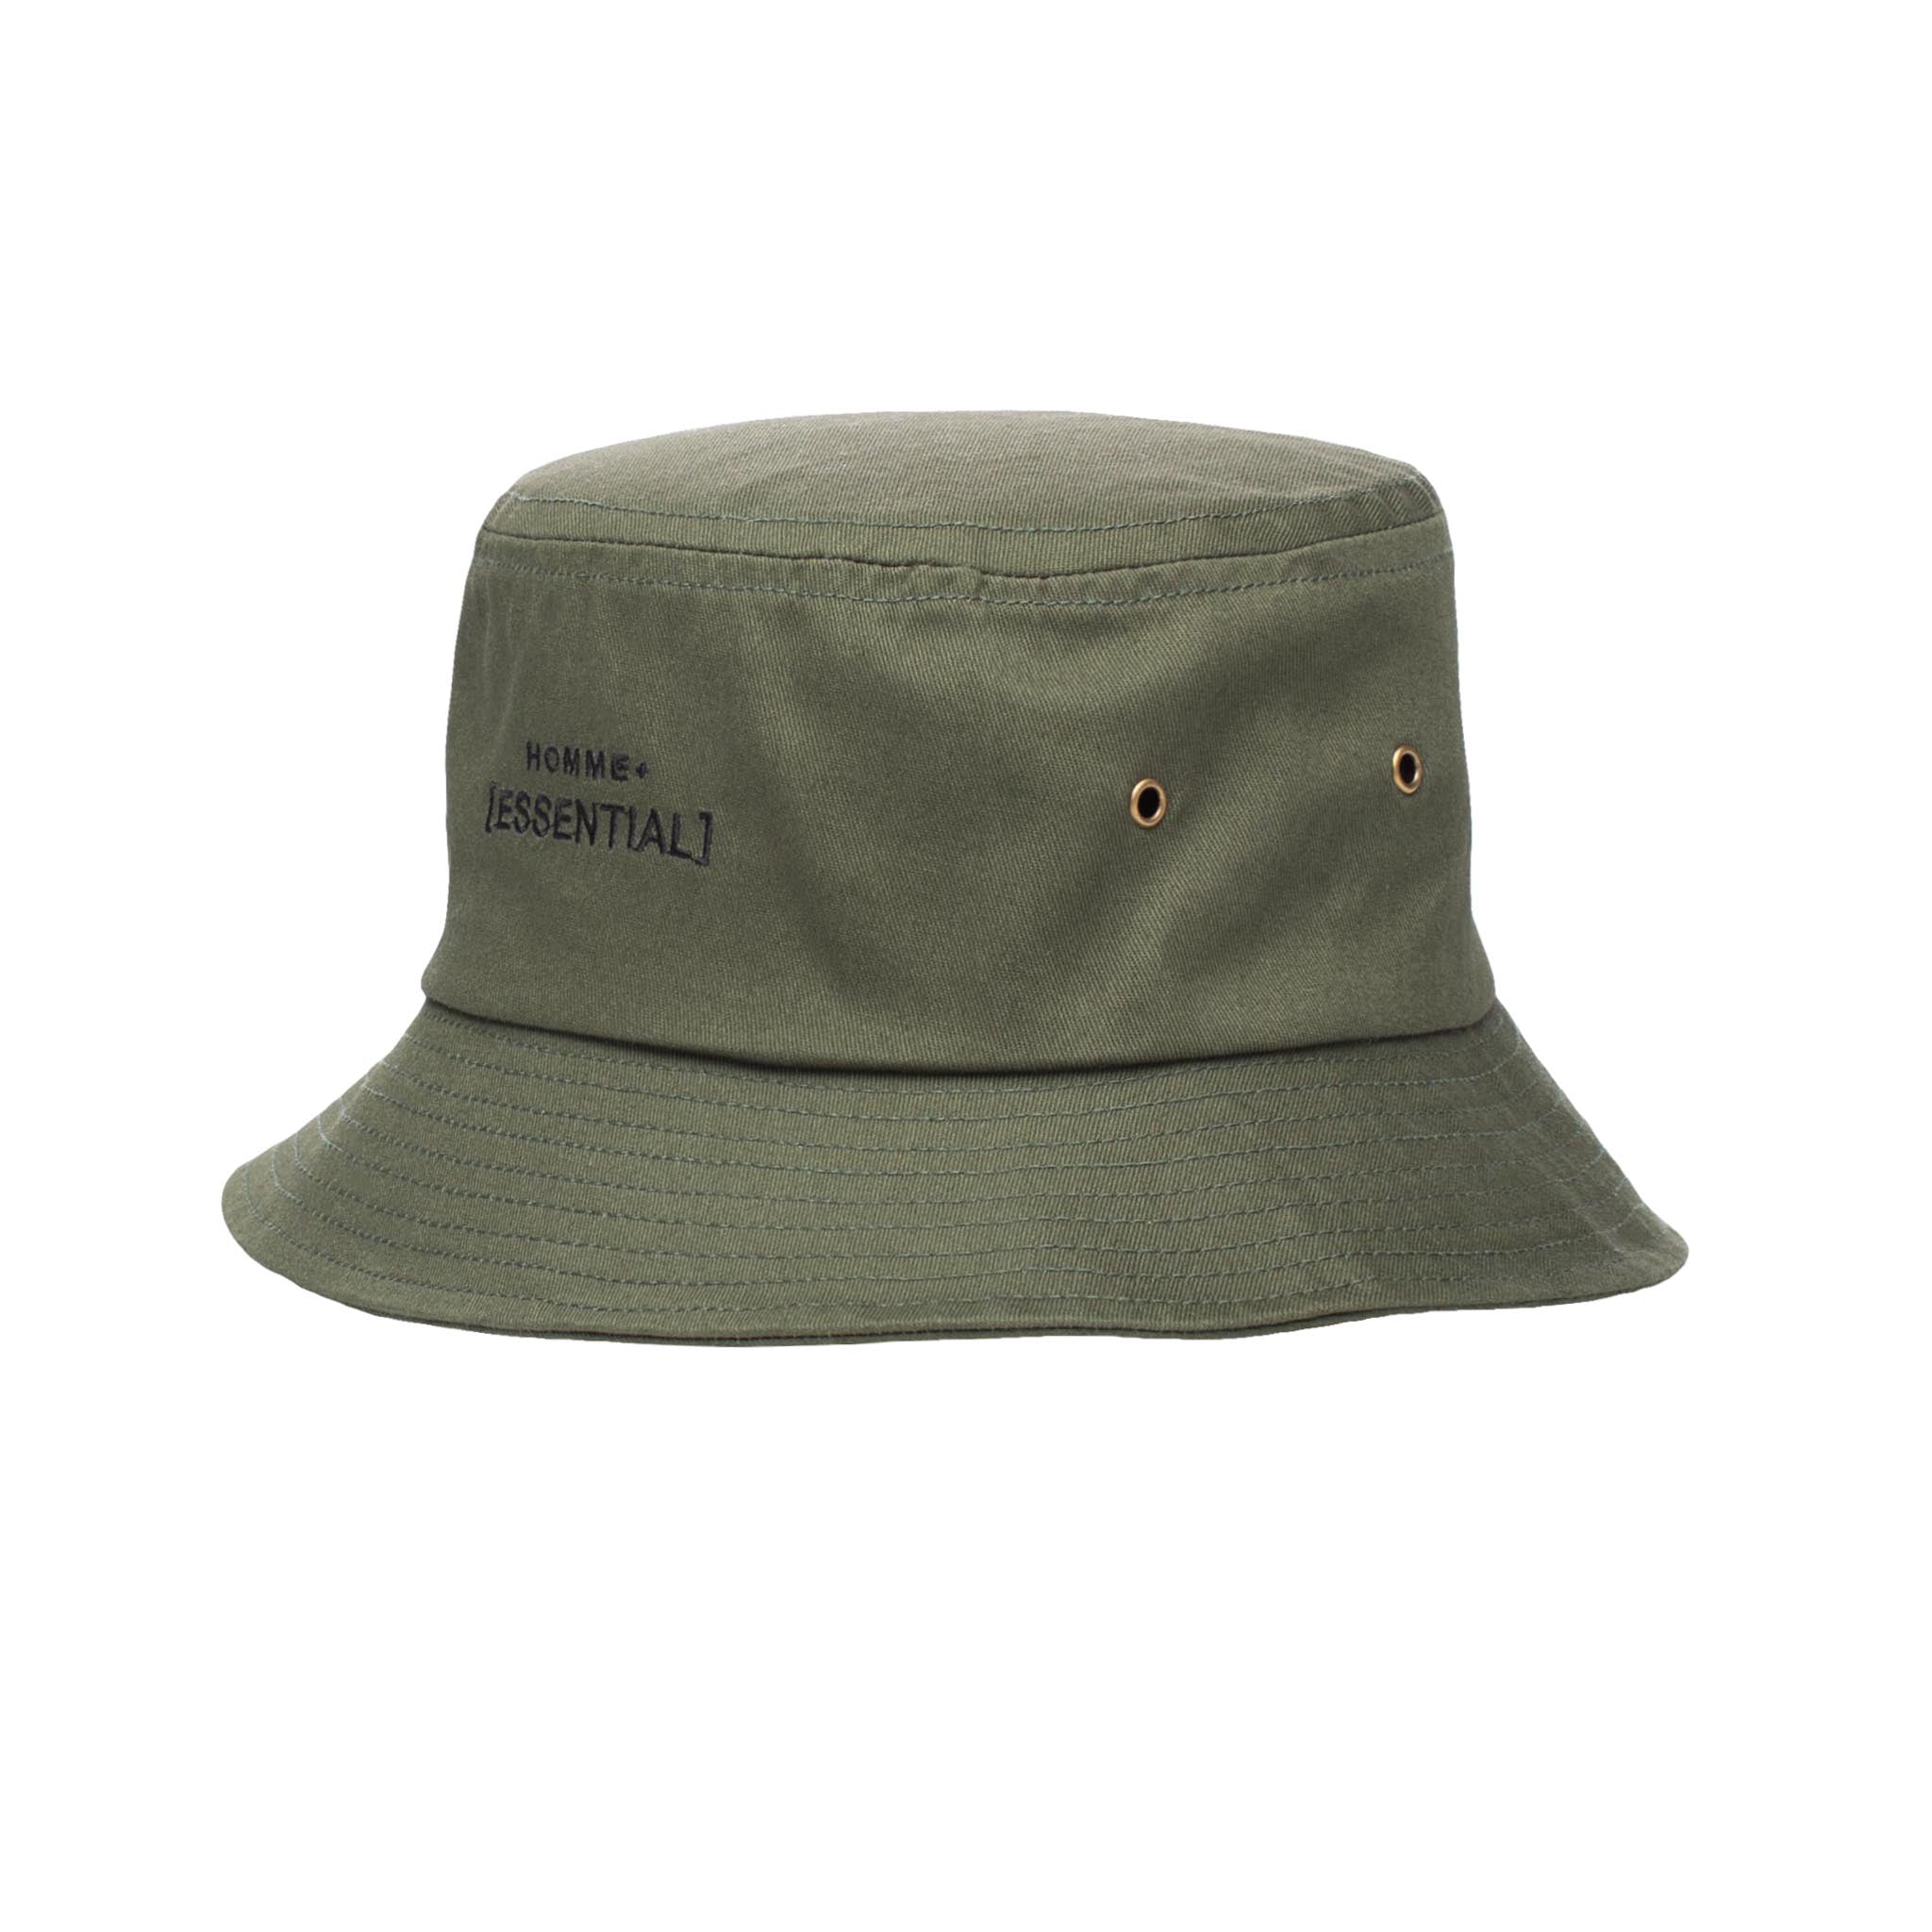 HOMME+ ESSENTIAL Bucket Hat Army